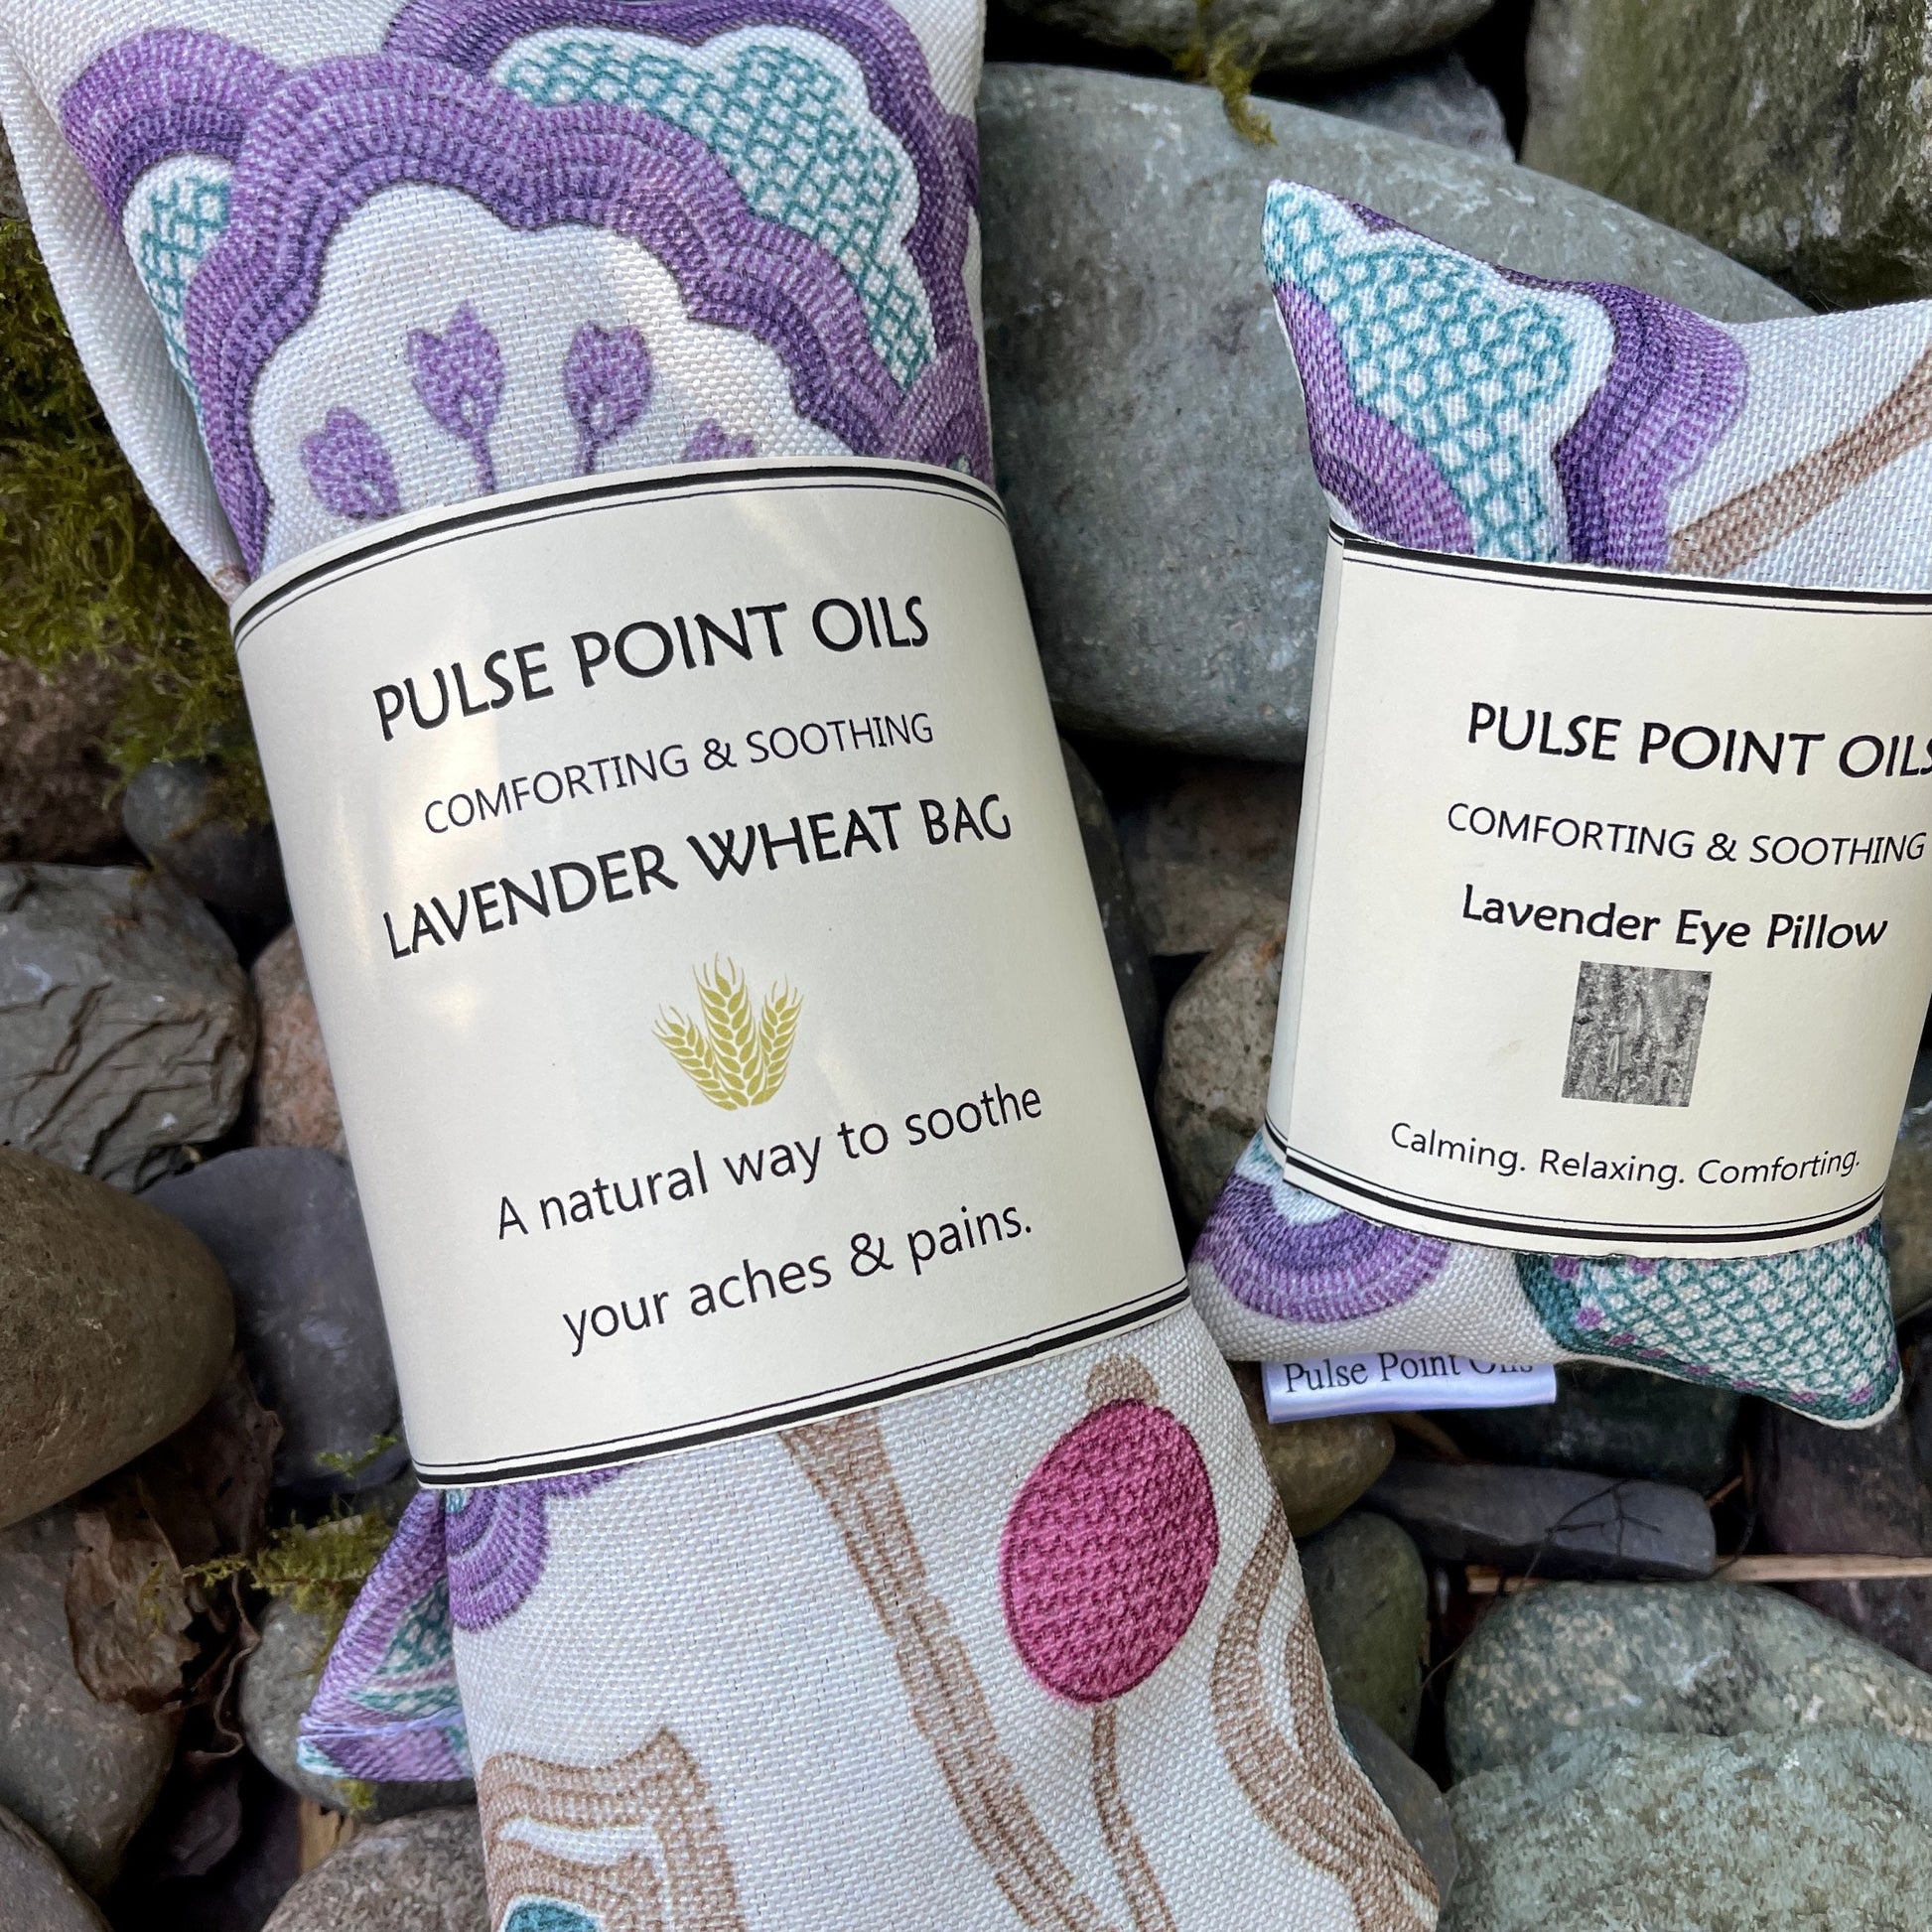 Lavender scented wheat bags. Heat pad body warmer. Magnolia with purple, pink and blue print. Lavender eye pillow.